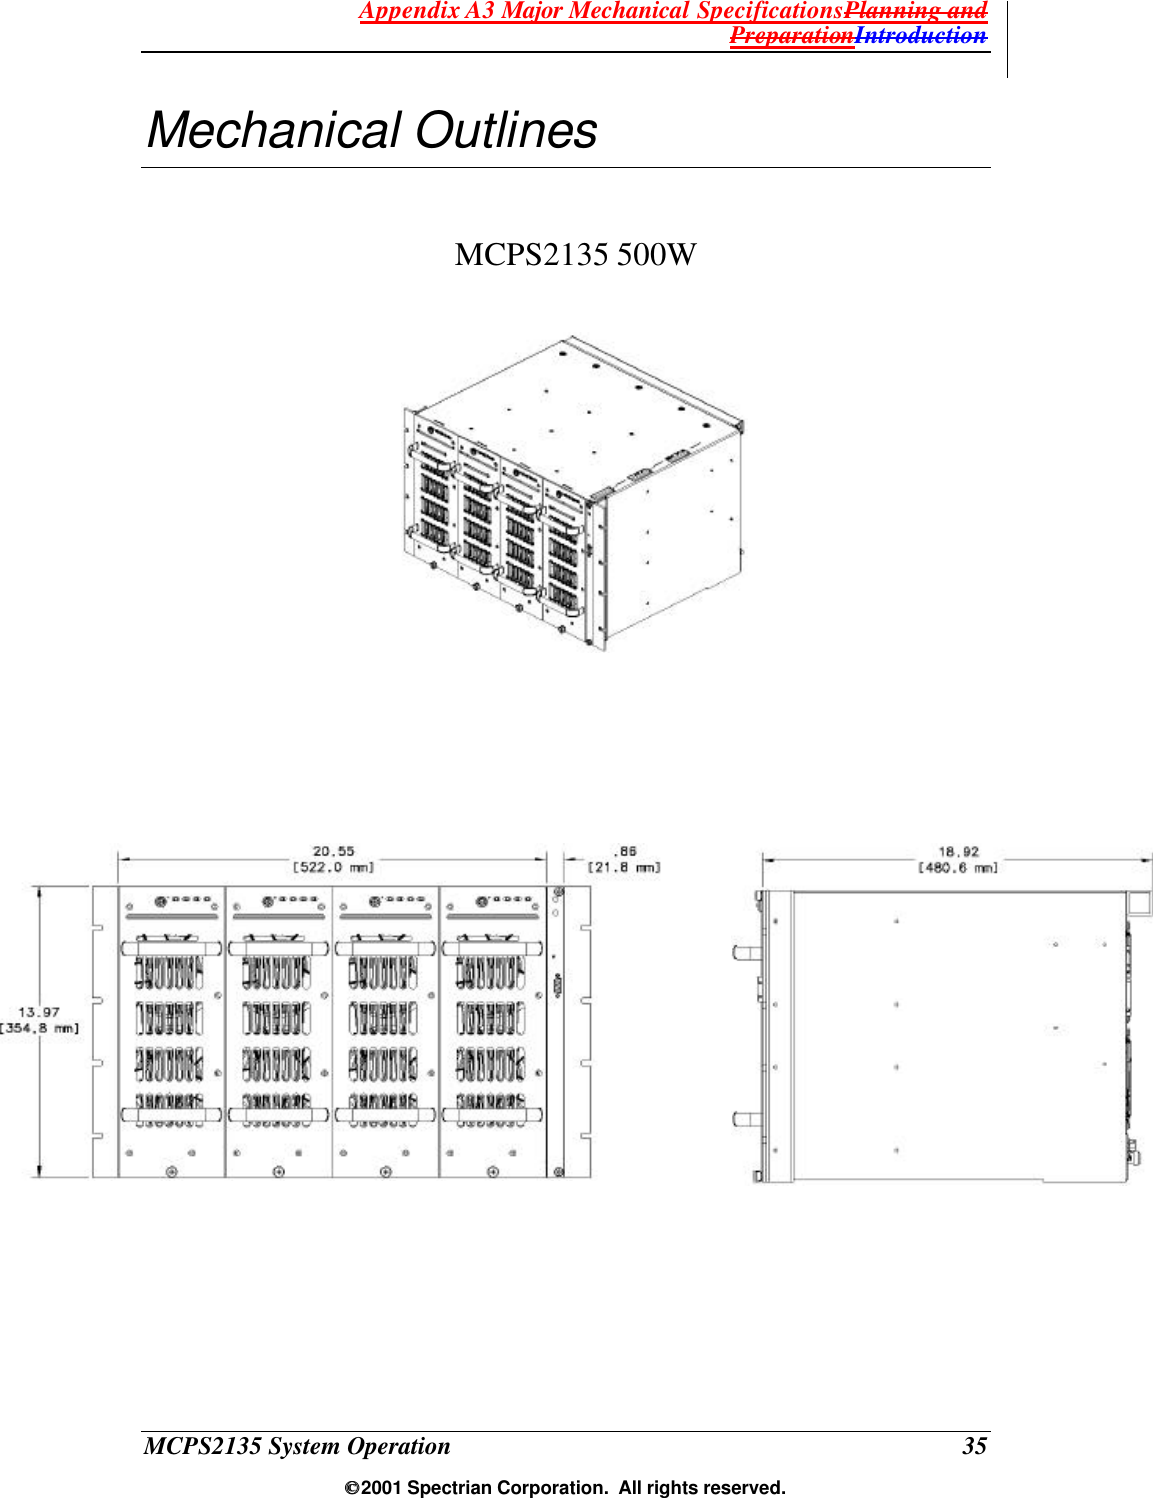 Appendix A3 Major Mechanical SpecificationsPlanning and PreparationIntroduction MCPS2135 System Operation  35  2001 Spectrian Corporation.  All rights reserved. Mechanical Outlines                     MCPS2135 500W  